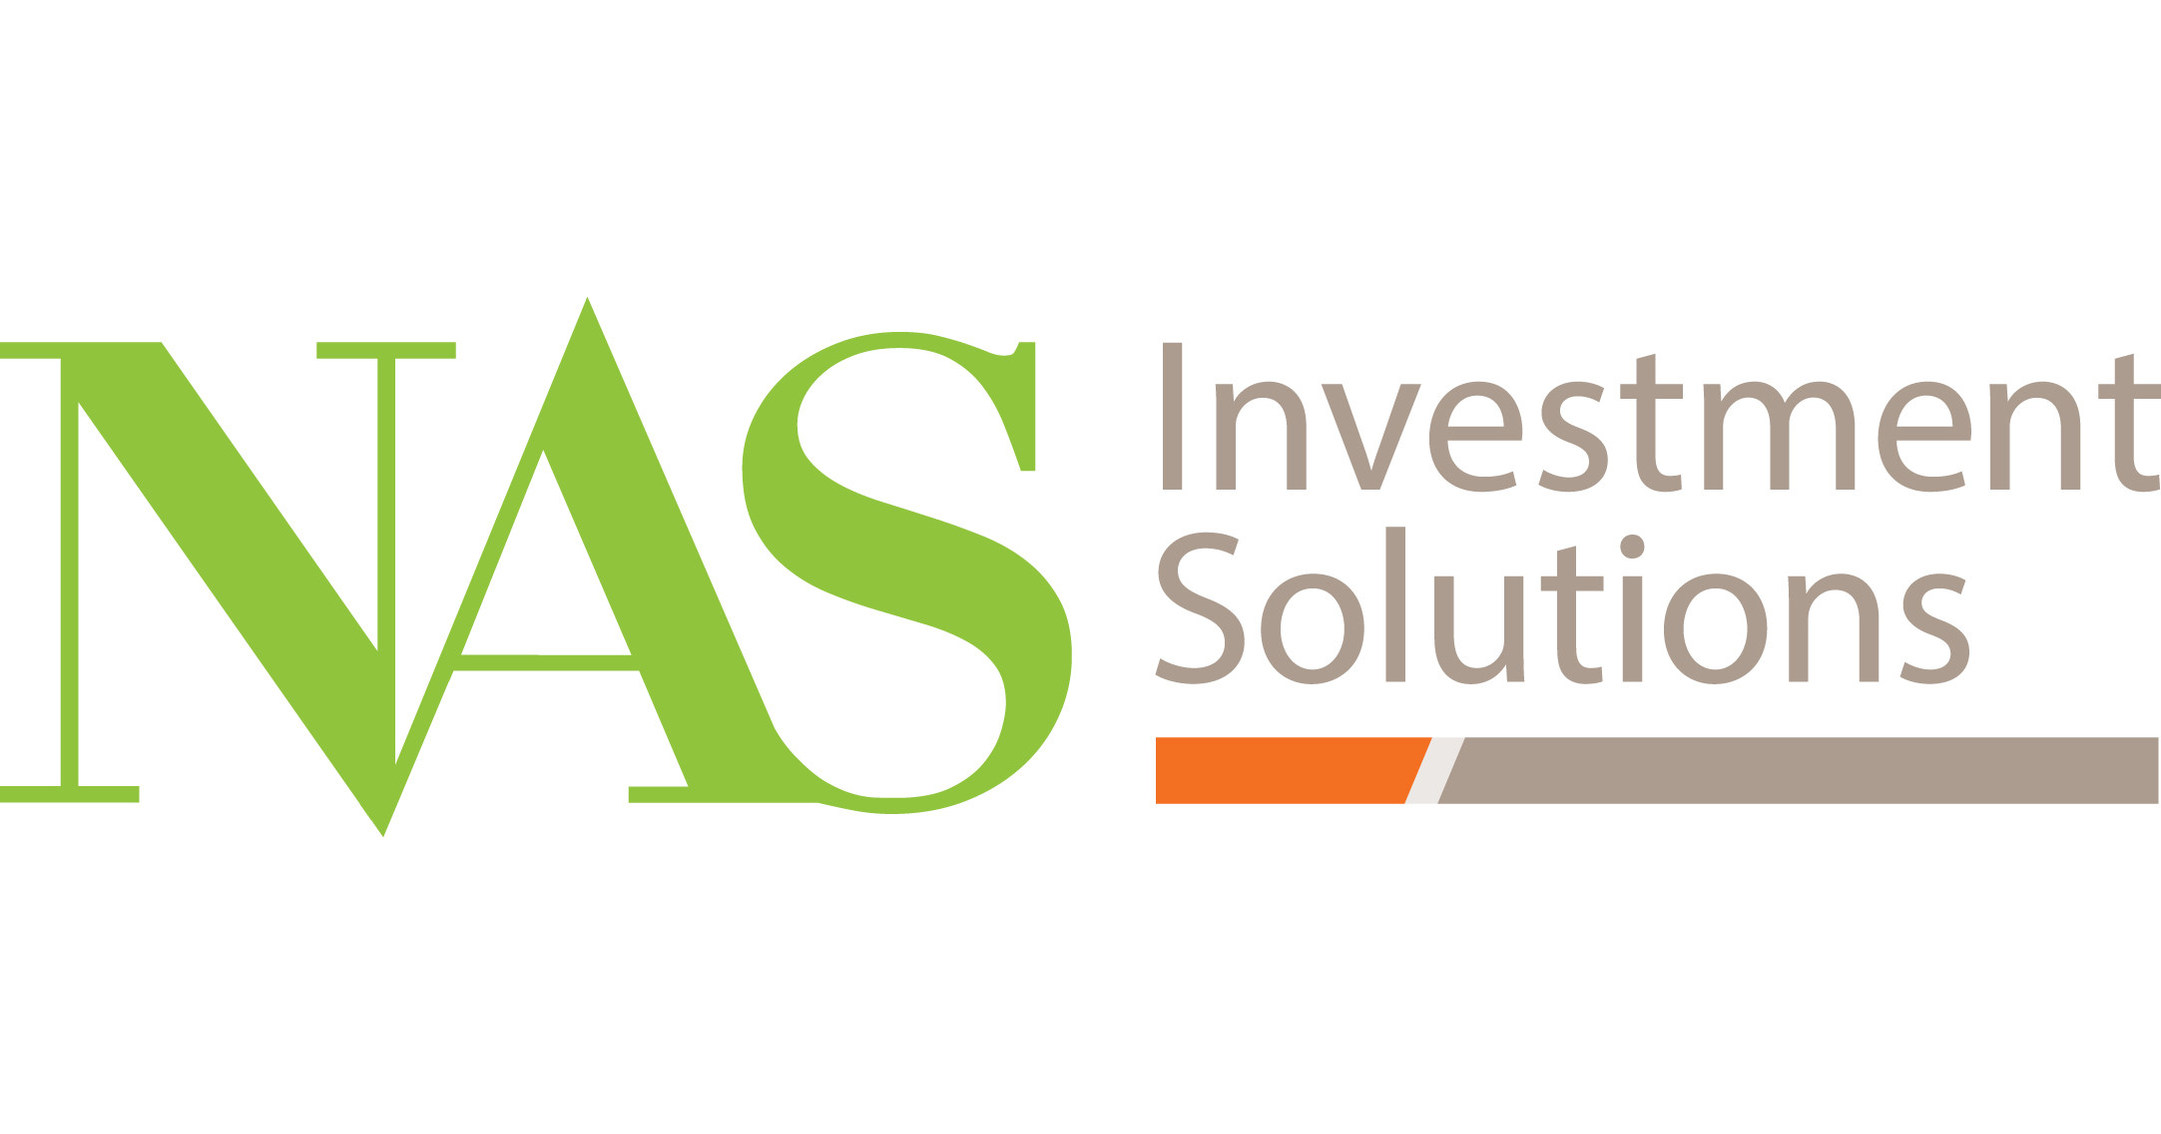 NAS Investment Solutions Launches New Website Featuring ...